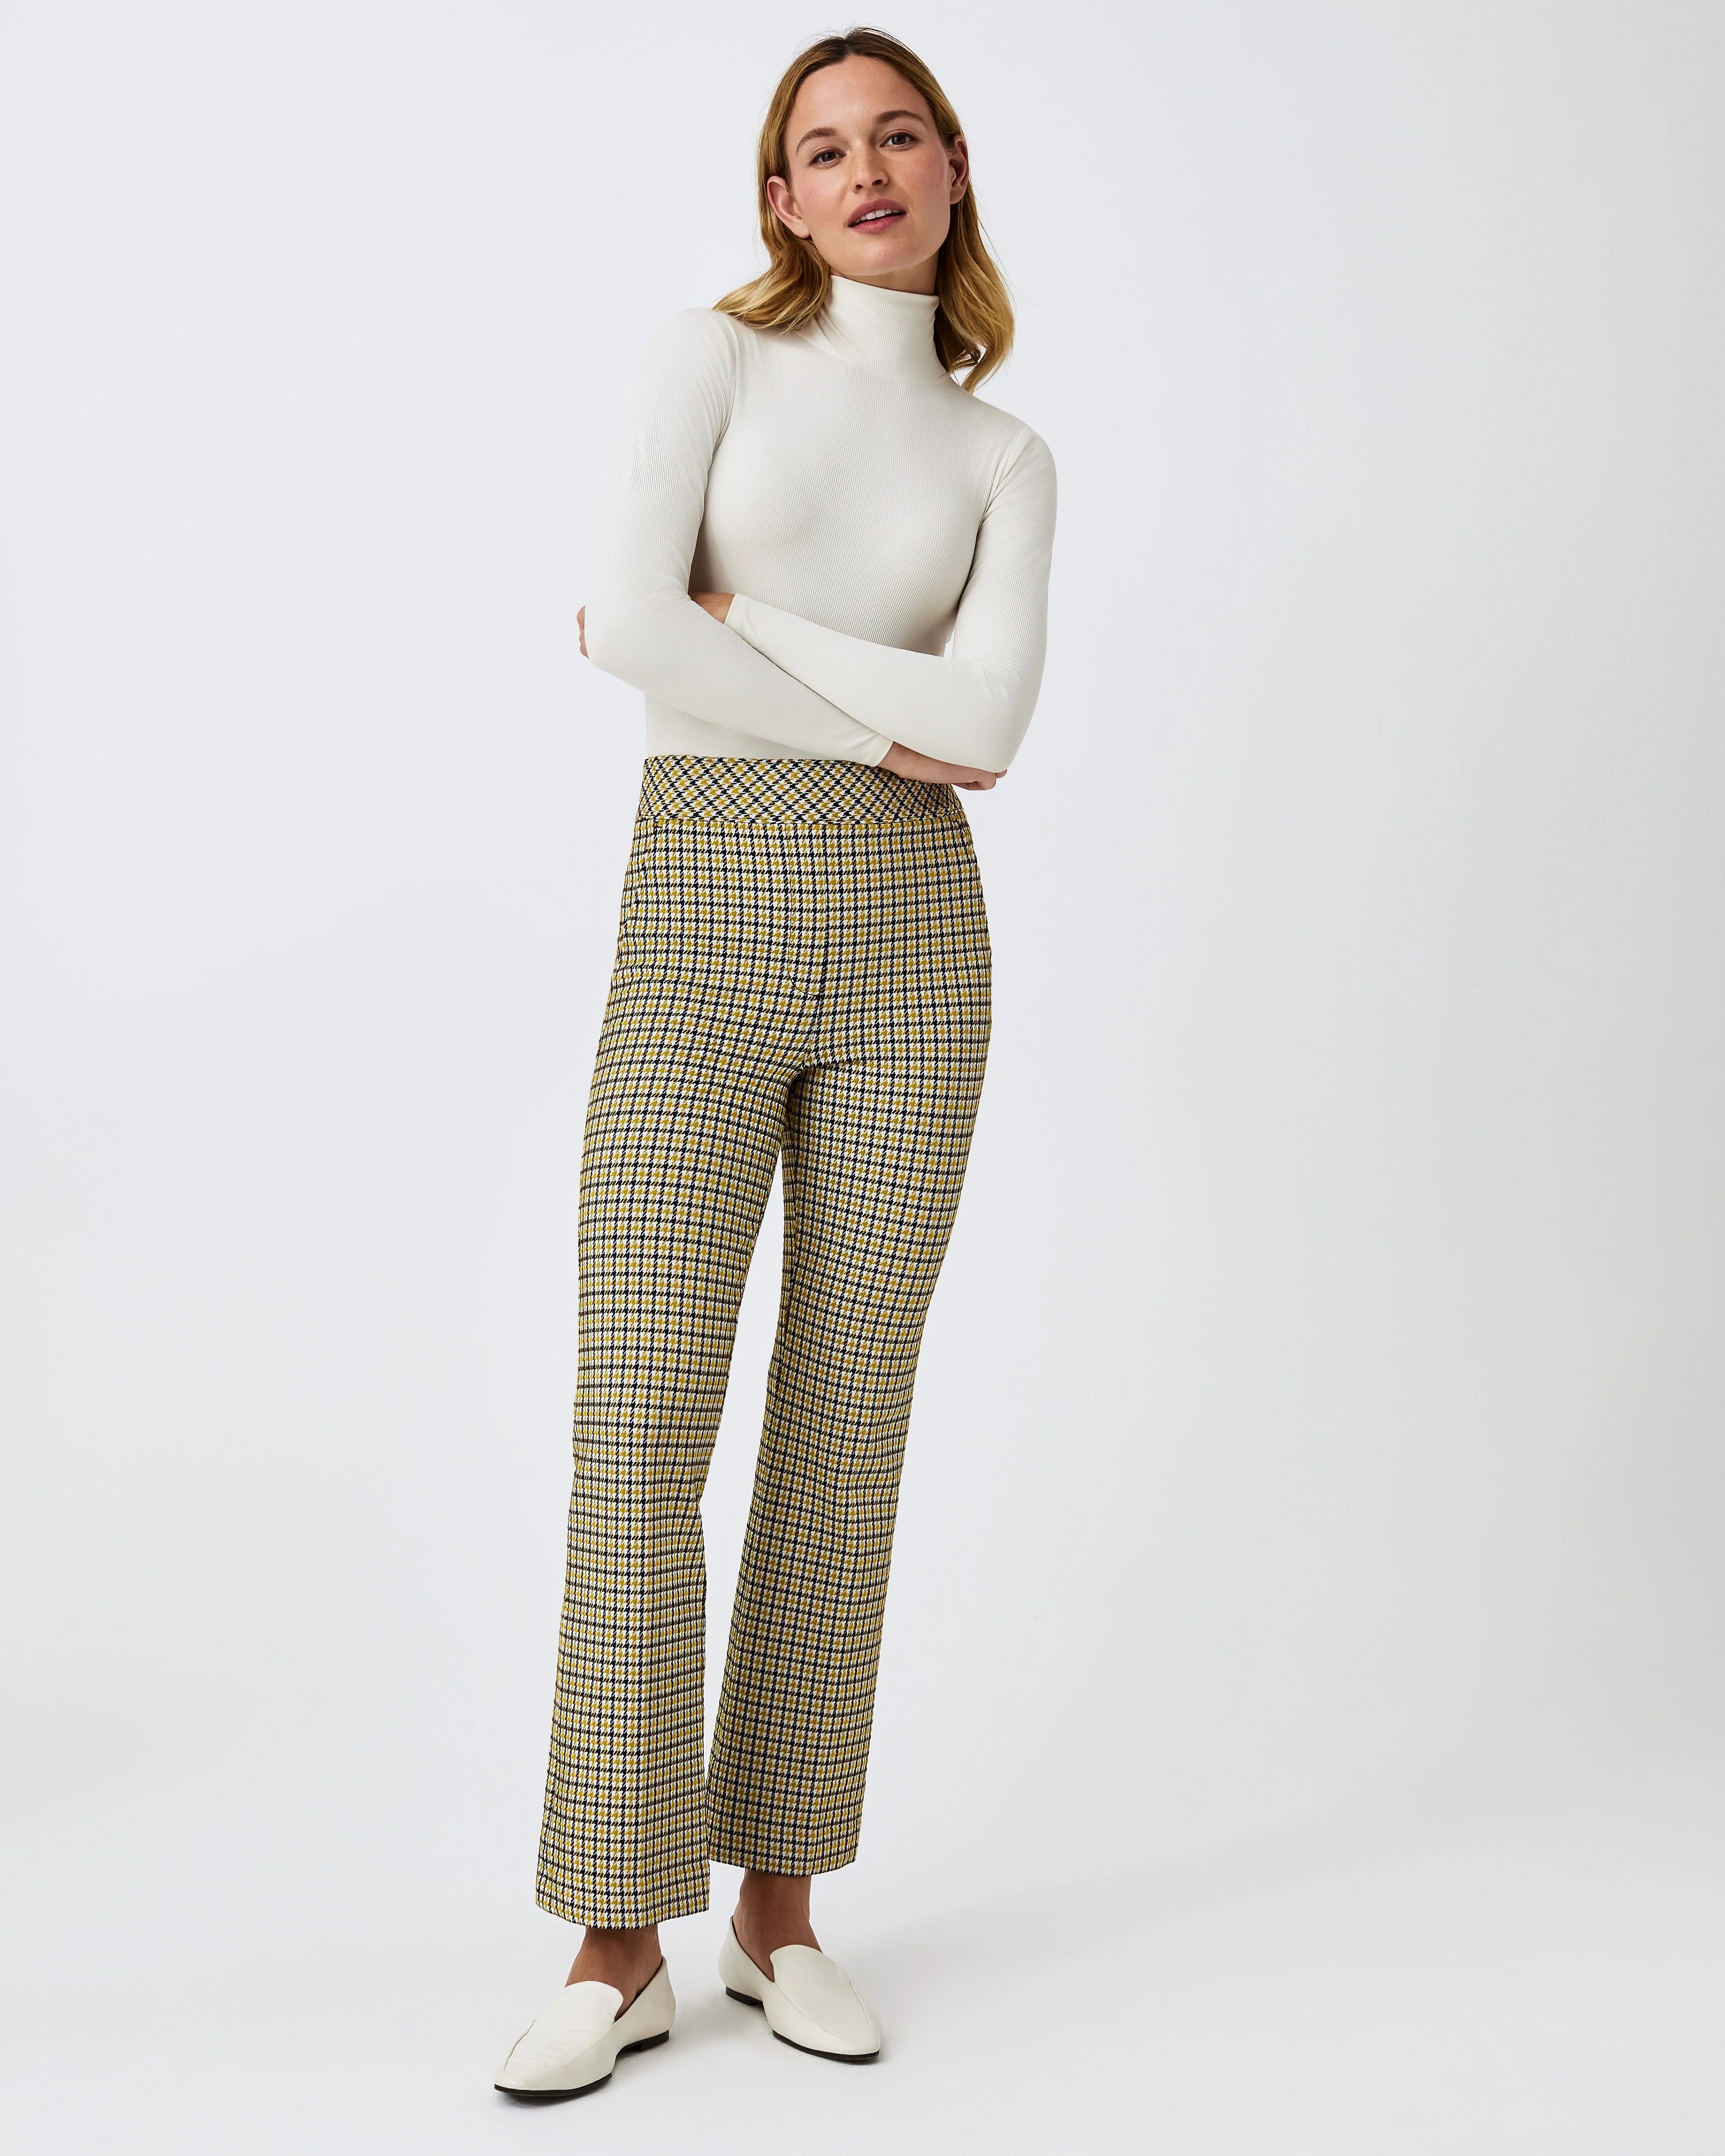 The Perfect Pant, Kick Flare in Houndstooth Jacquard | Spanx